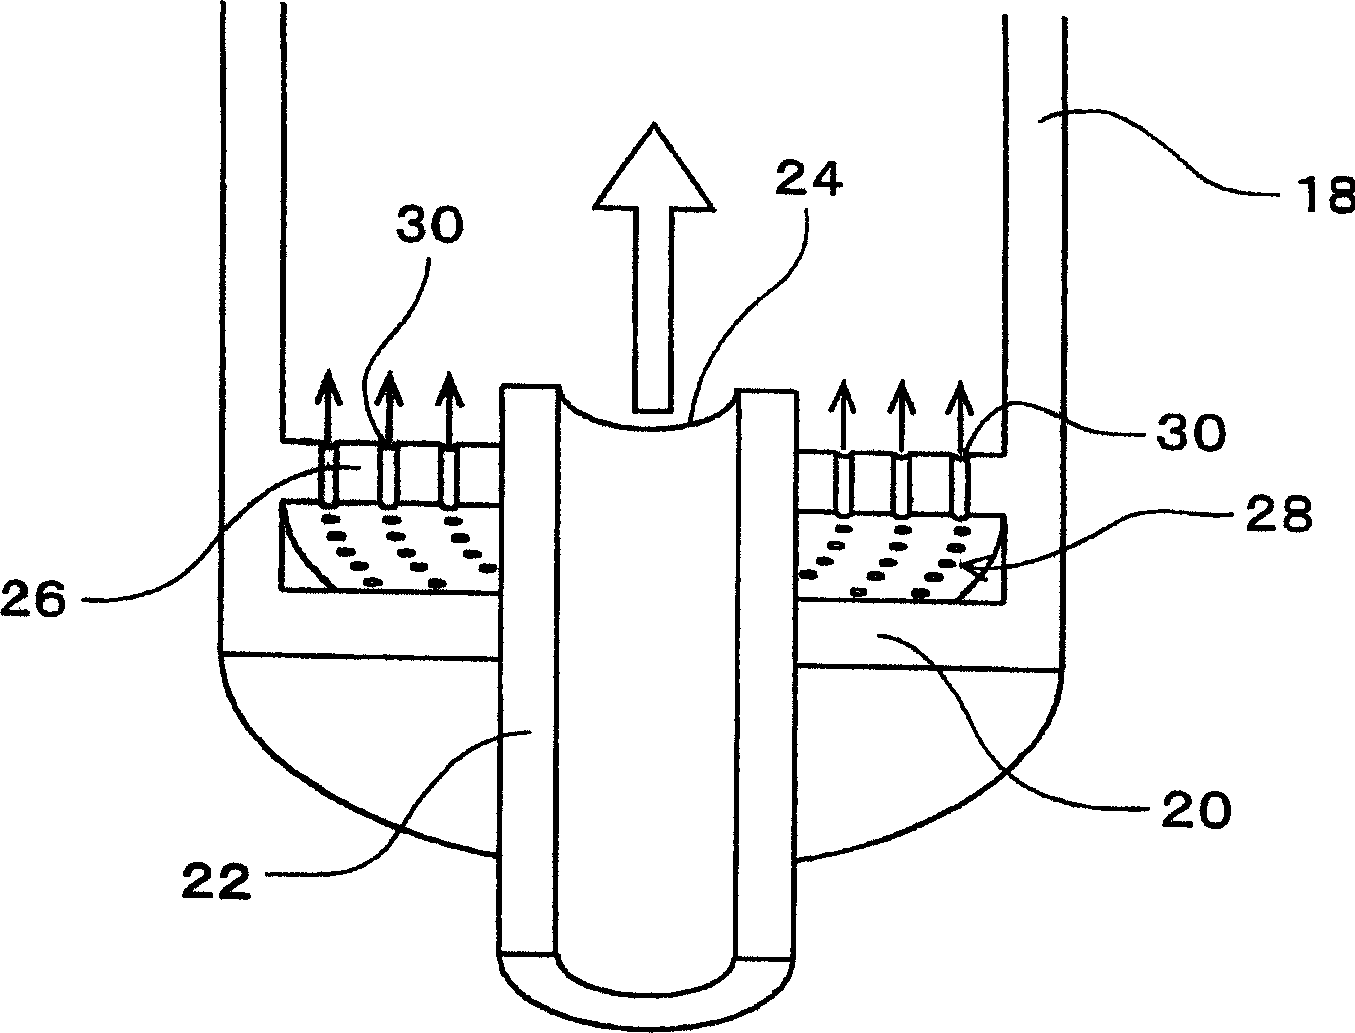 Substrate disposal device